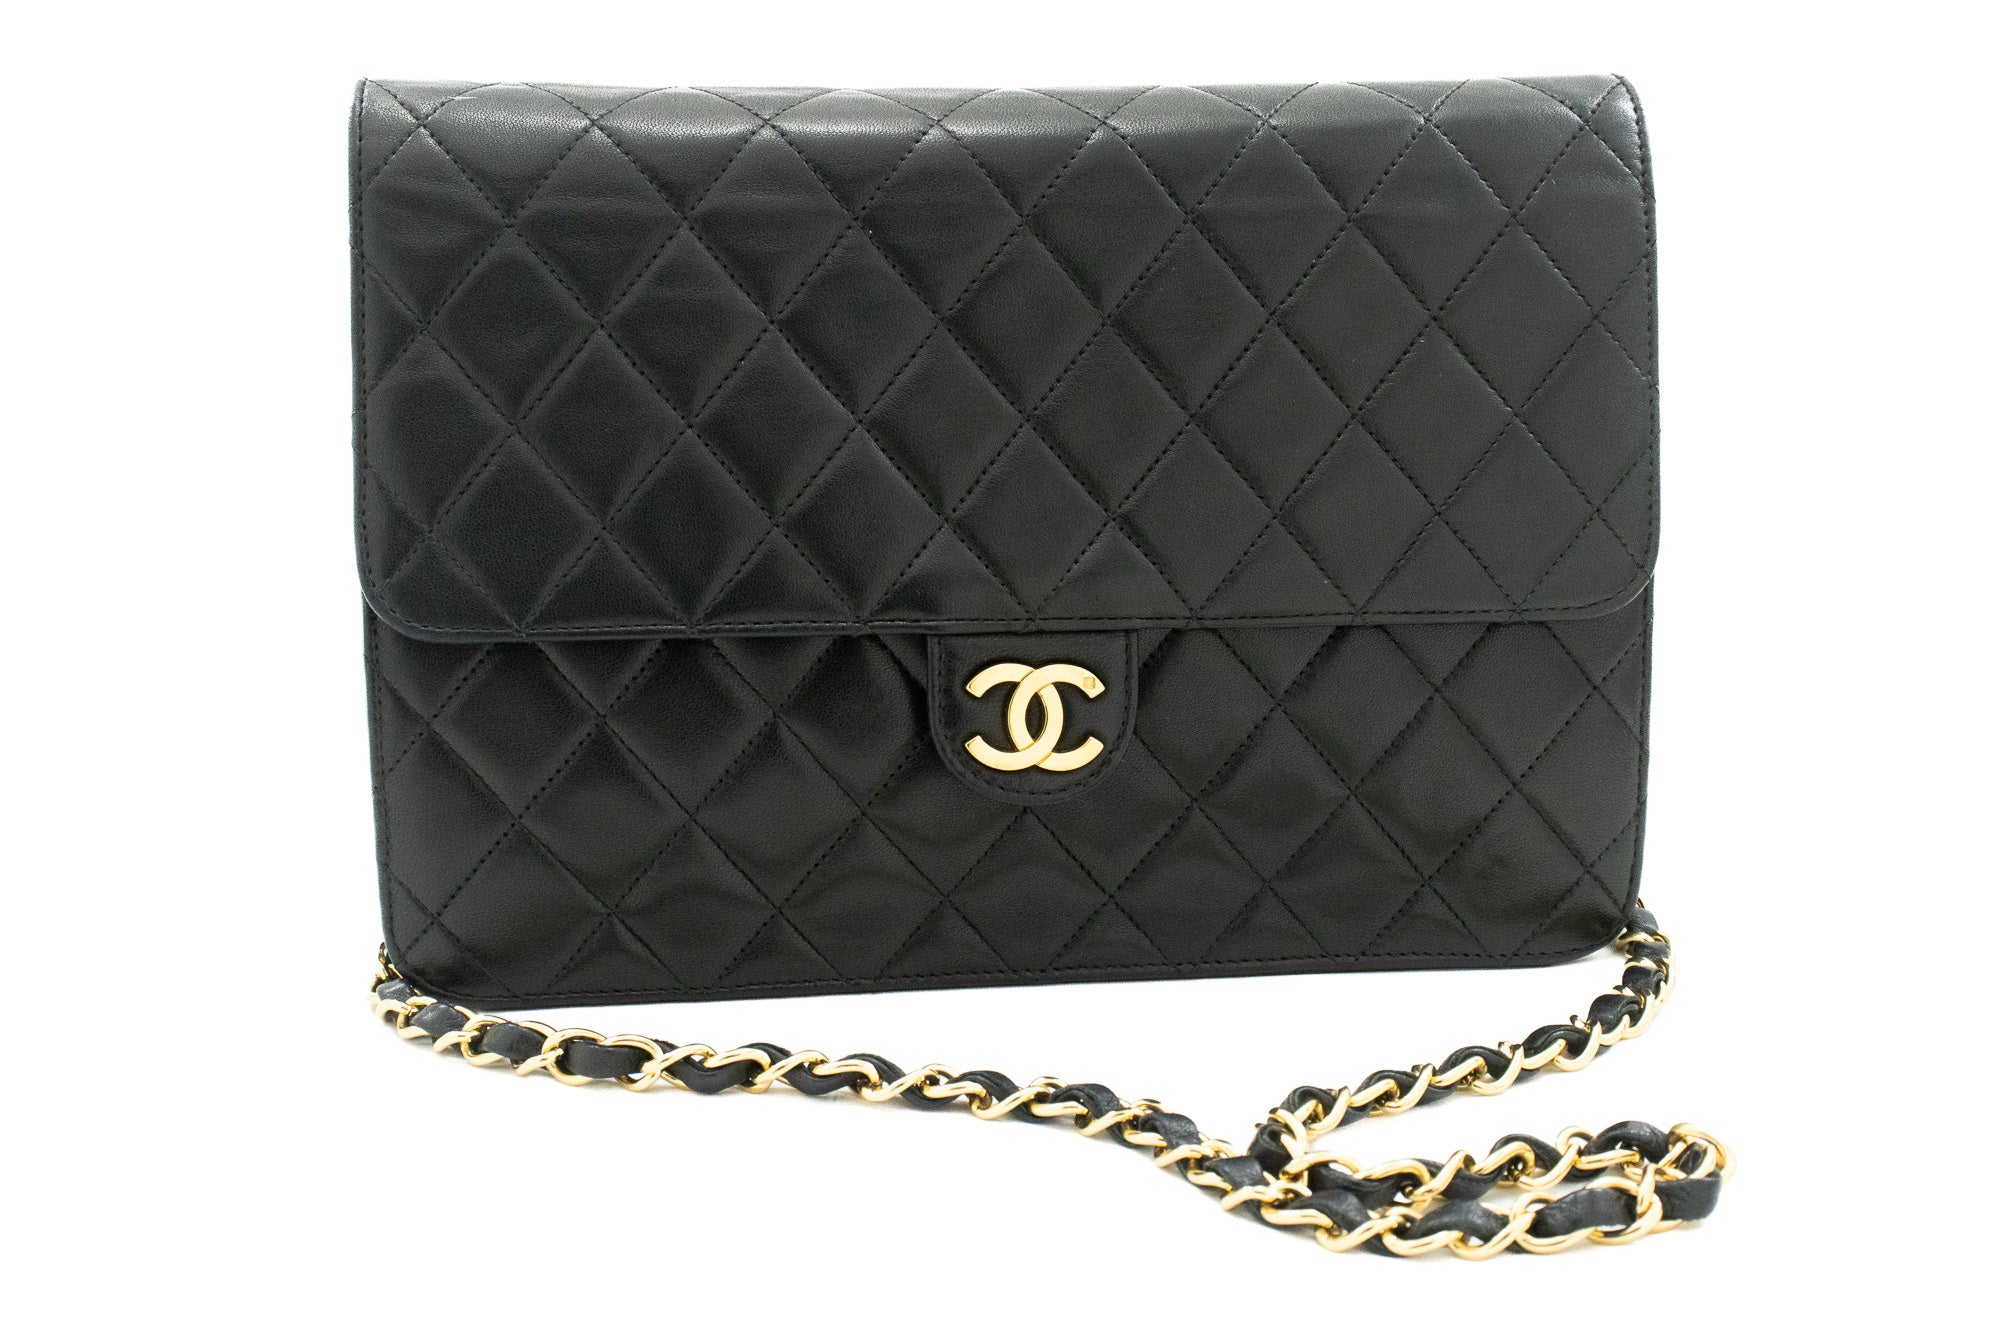 Chanel classic woman clutch purse quilted